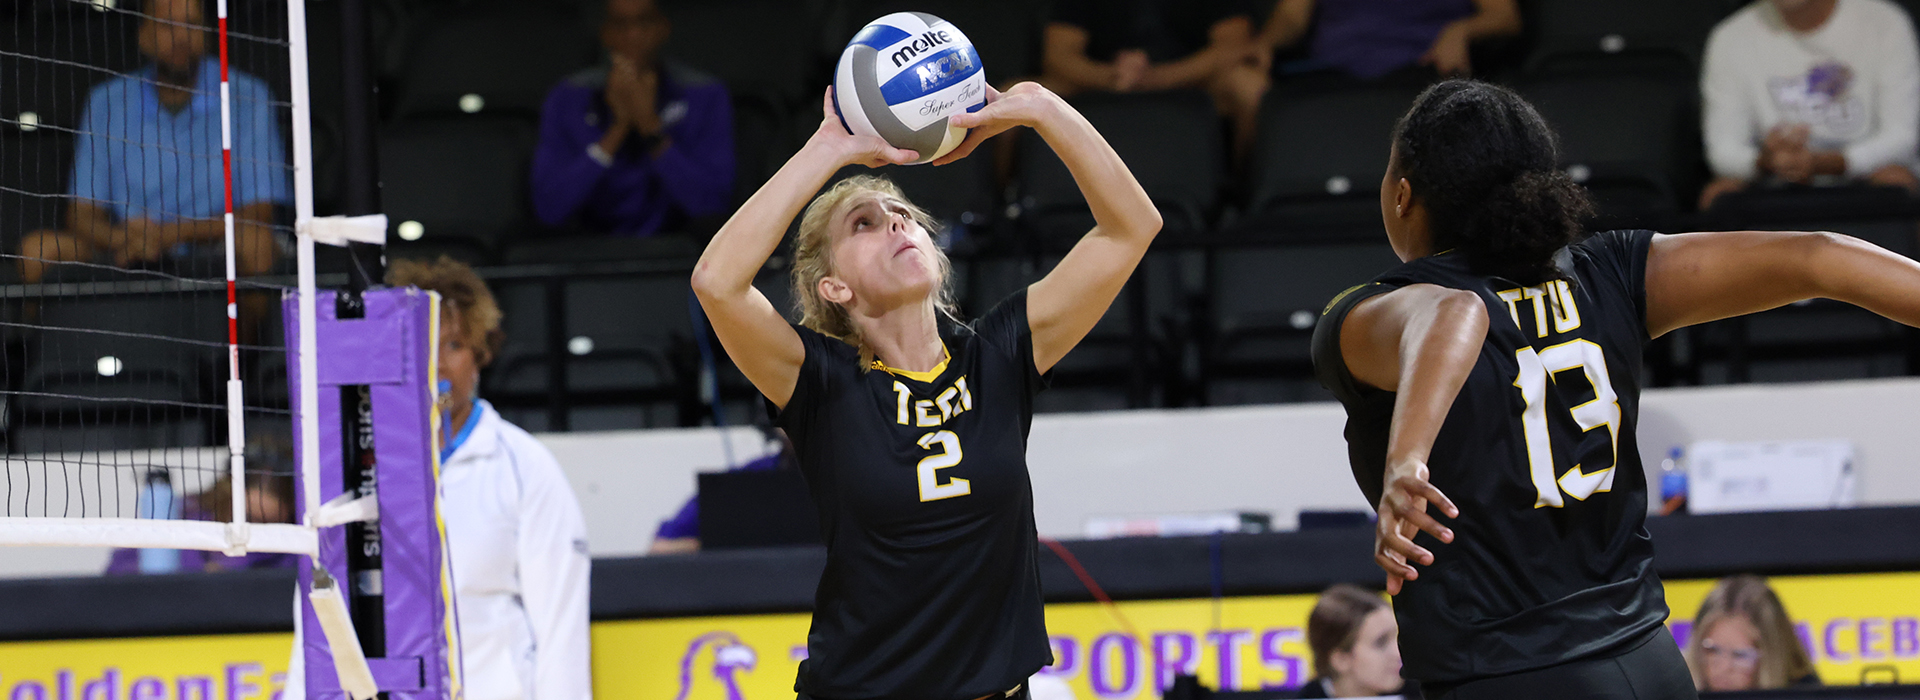 Karlen captures OVC Setter and Newcomer of the Week accolades